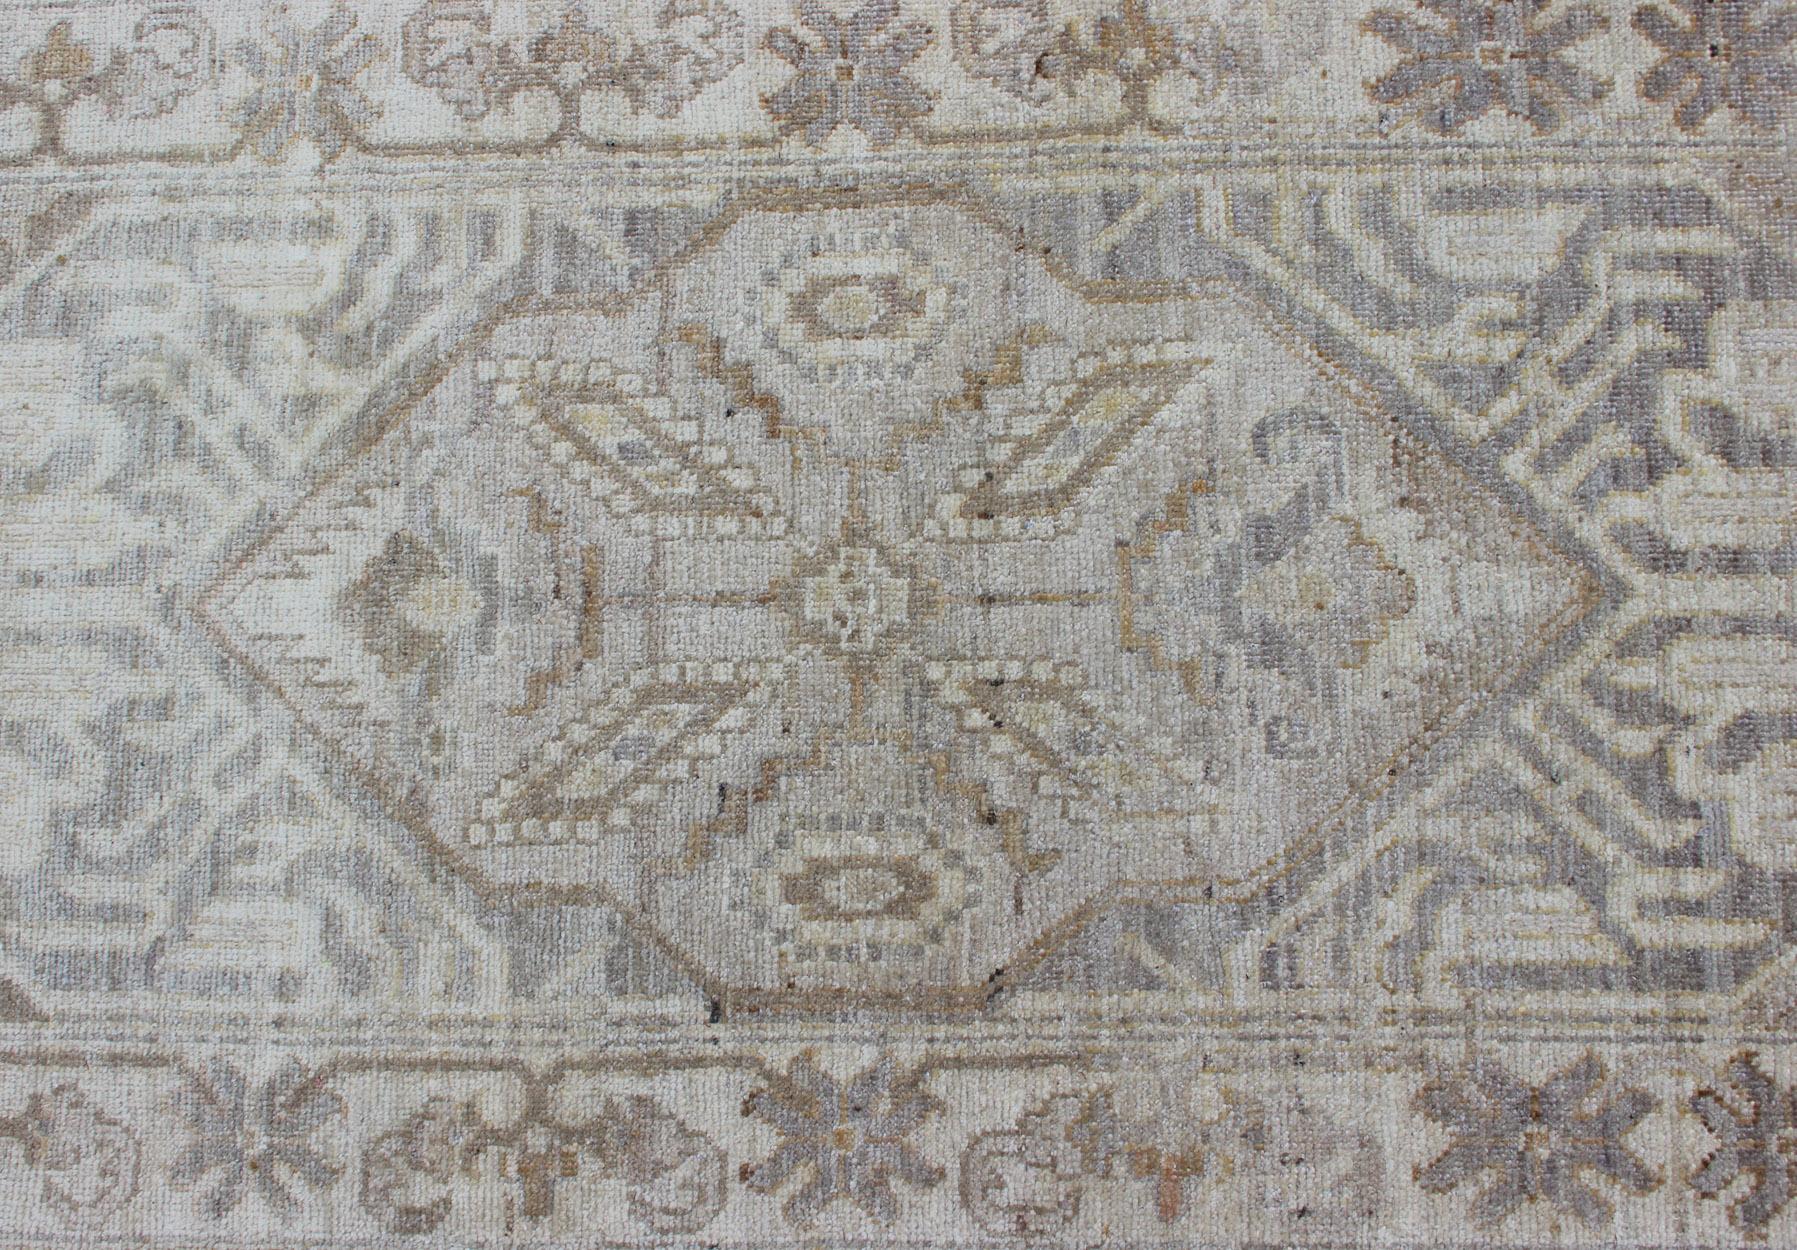 Keivan Woven Arts Khotan Runner with All-Over Geometric Medallion Pattern. Keivan Woven Arts / rug / MP-1310-131 country of origin / type: Afghanistan / Khotan. 
Measures: 2'5 x 10'8 
This Khotan features a geometric all-over design flanked by a